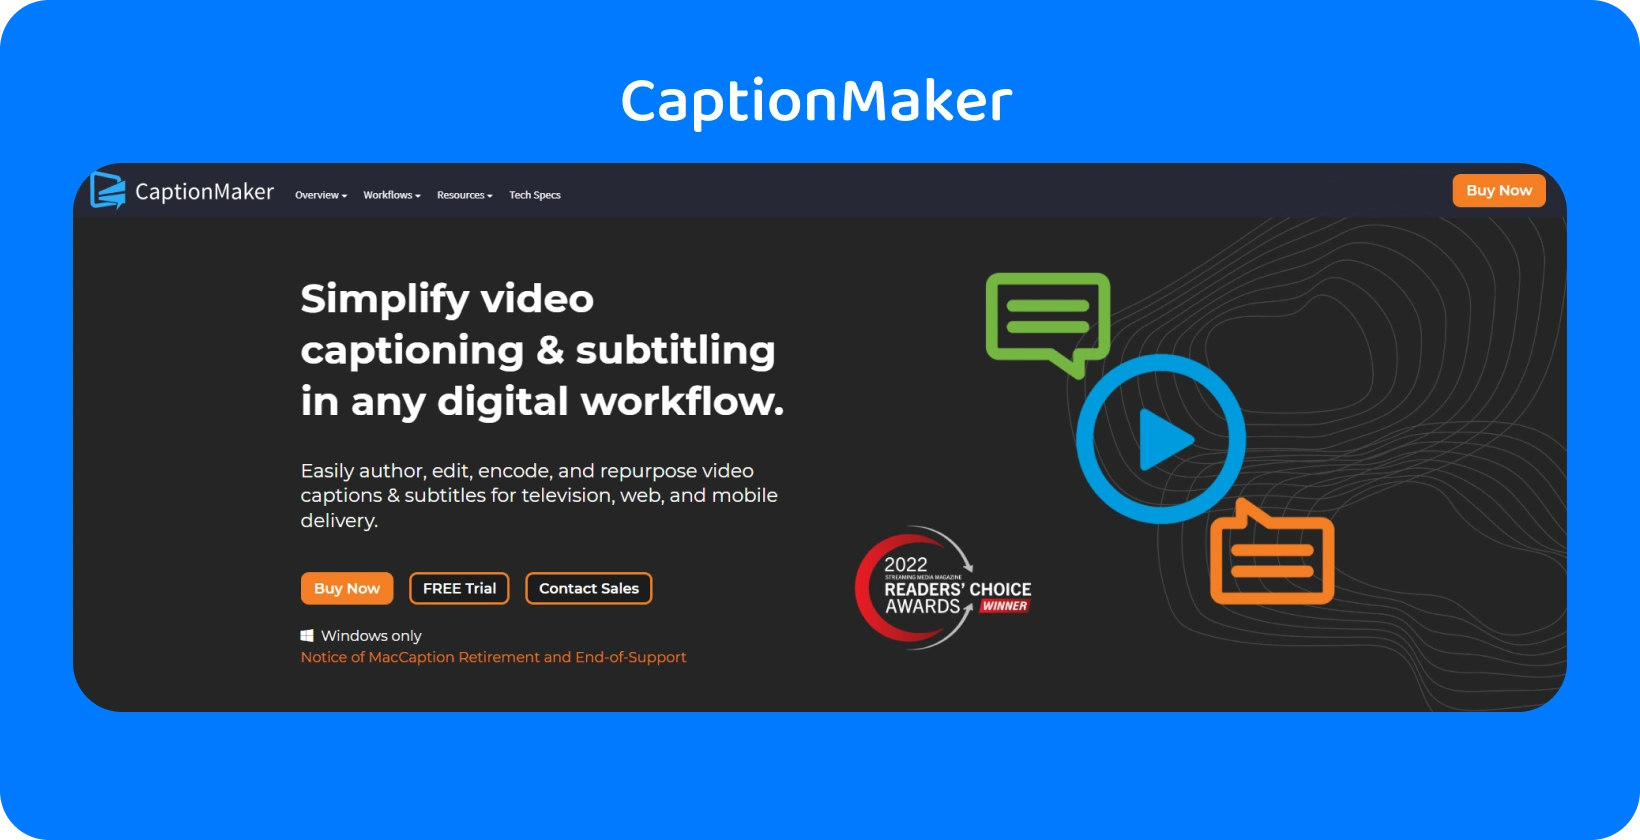 CaptionMaker's interface for video captioning & subtitling streamlines digital workflows across devices.